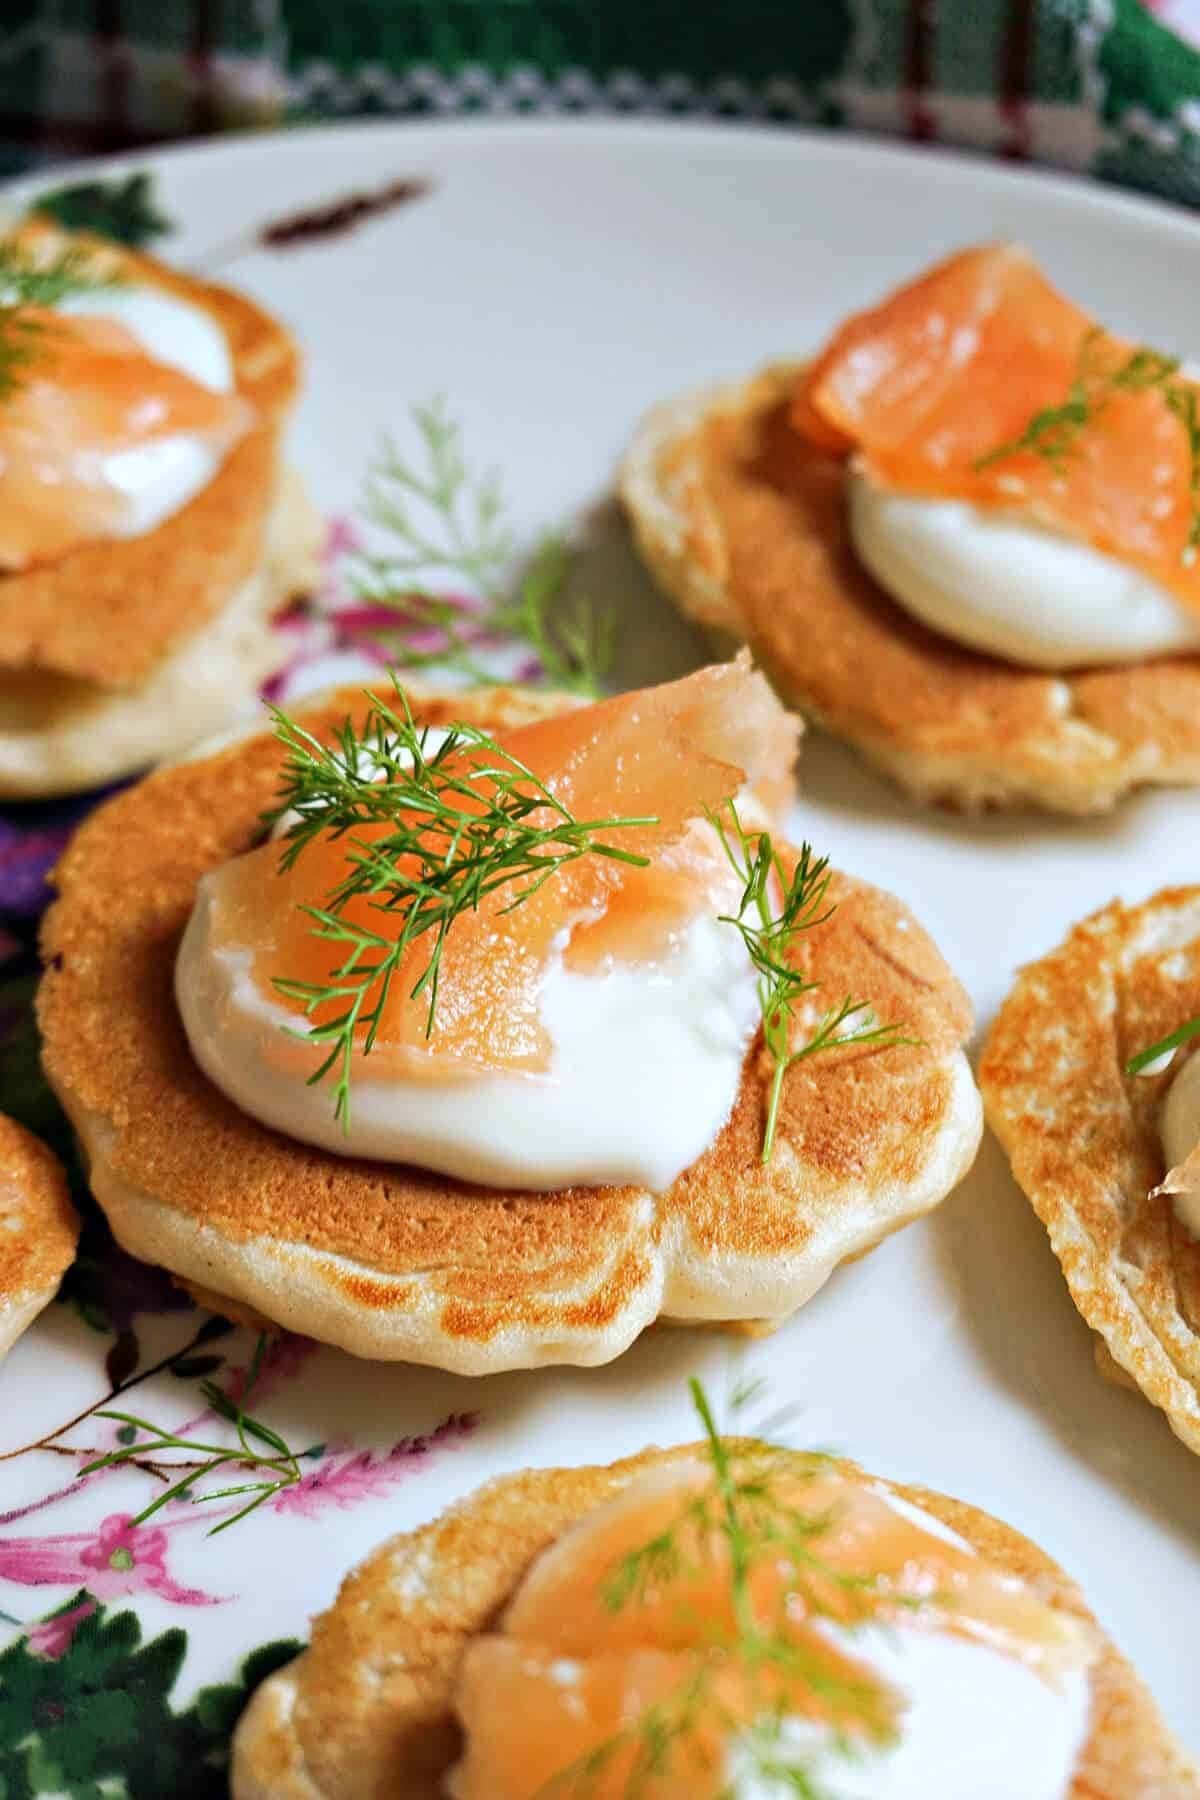 Blinis topped with silky cream, smoked salmon, dill and a touch of lemon